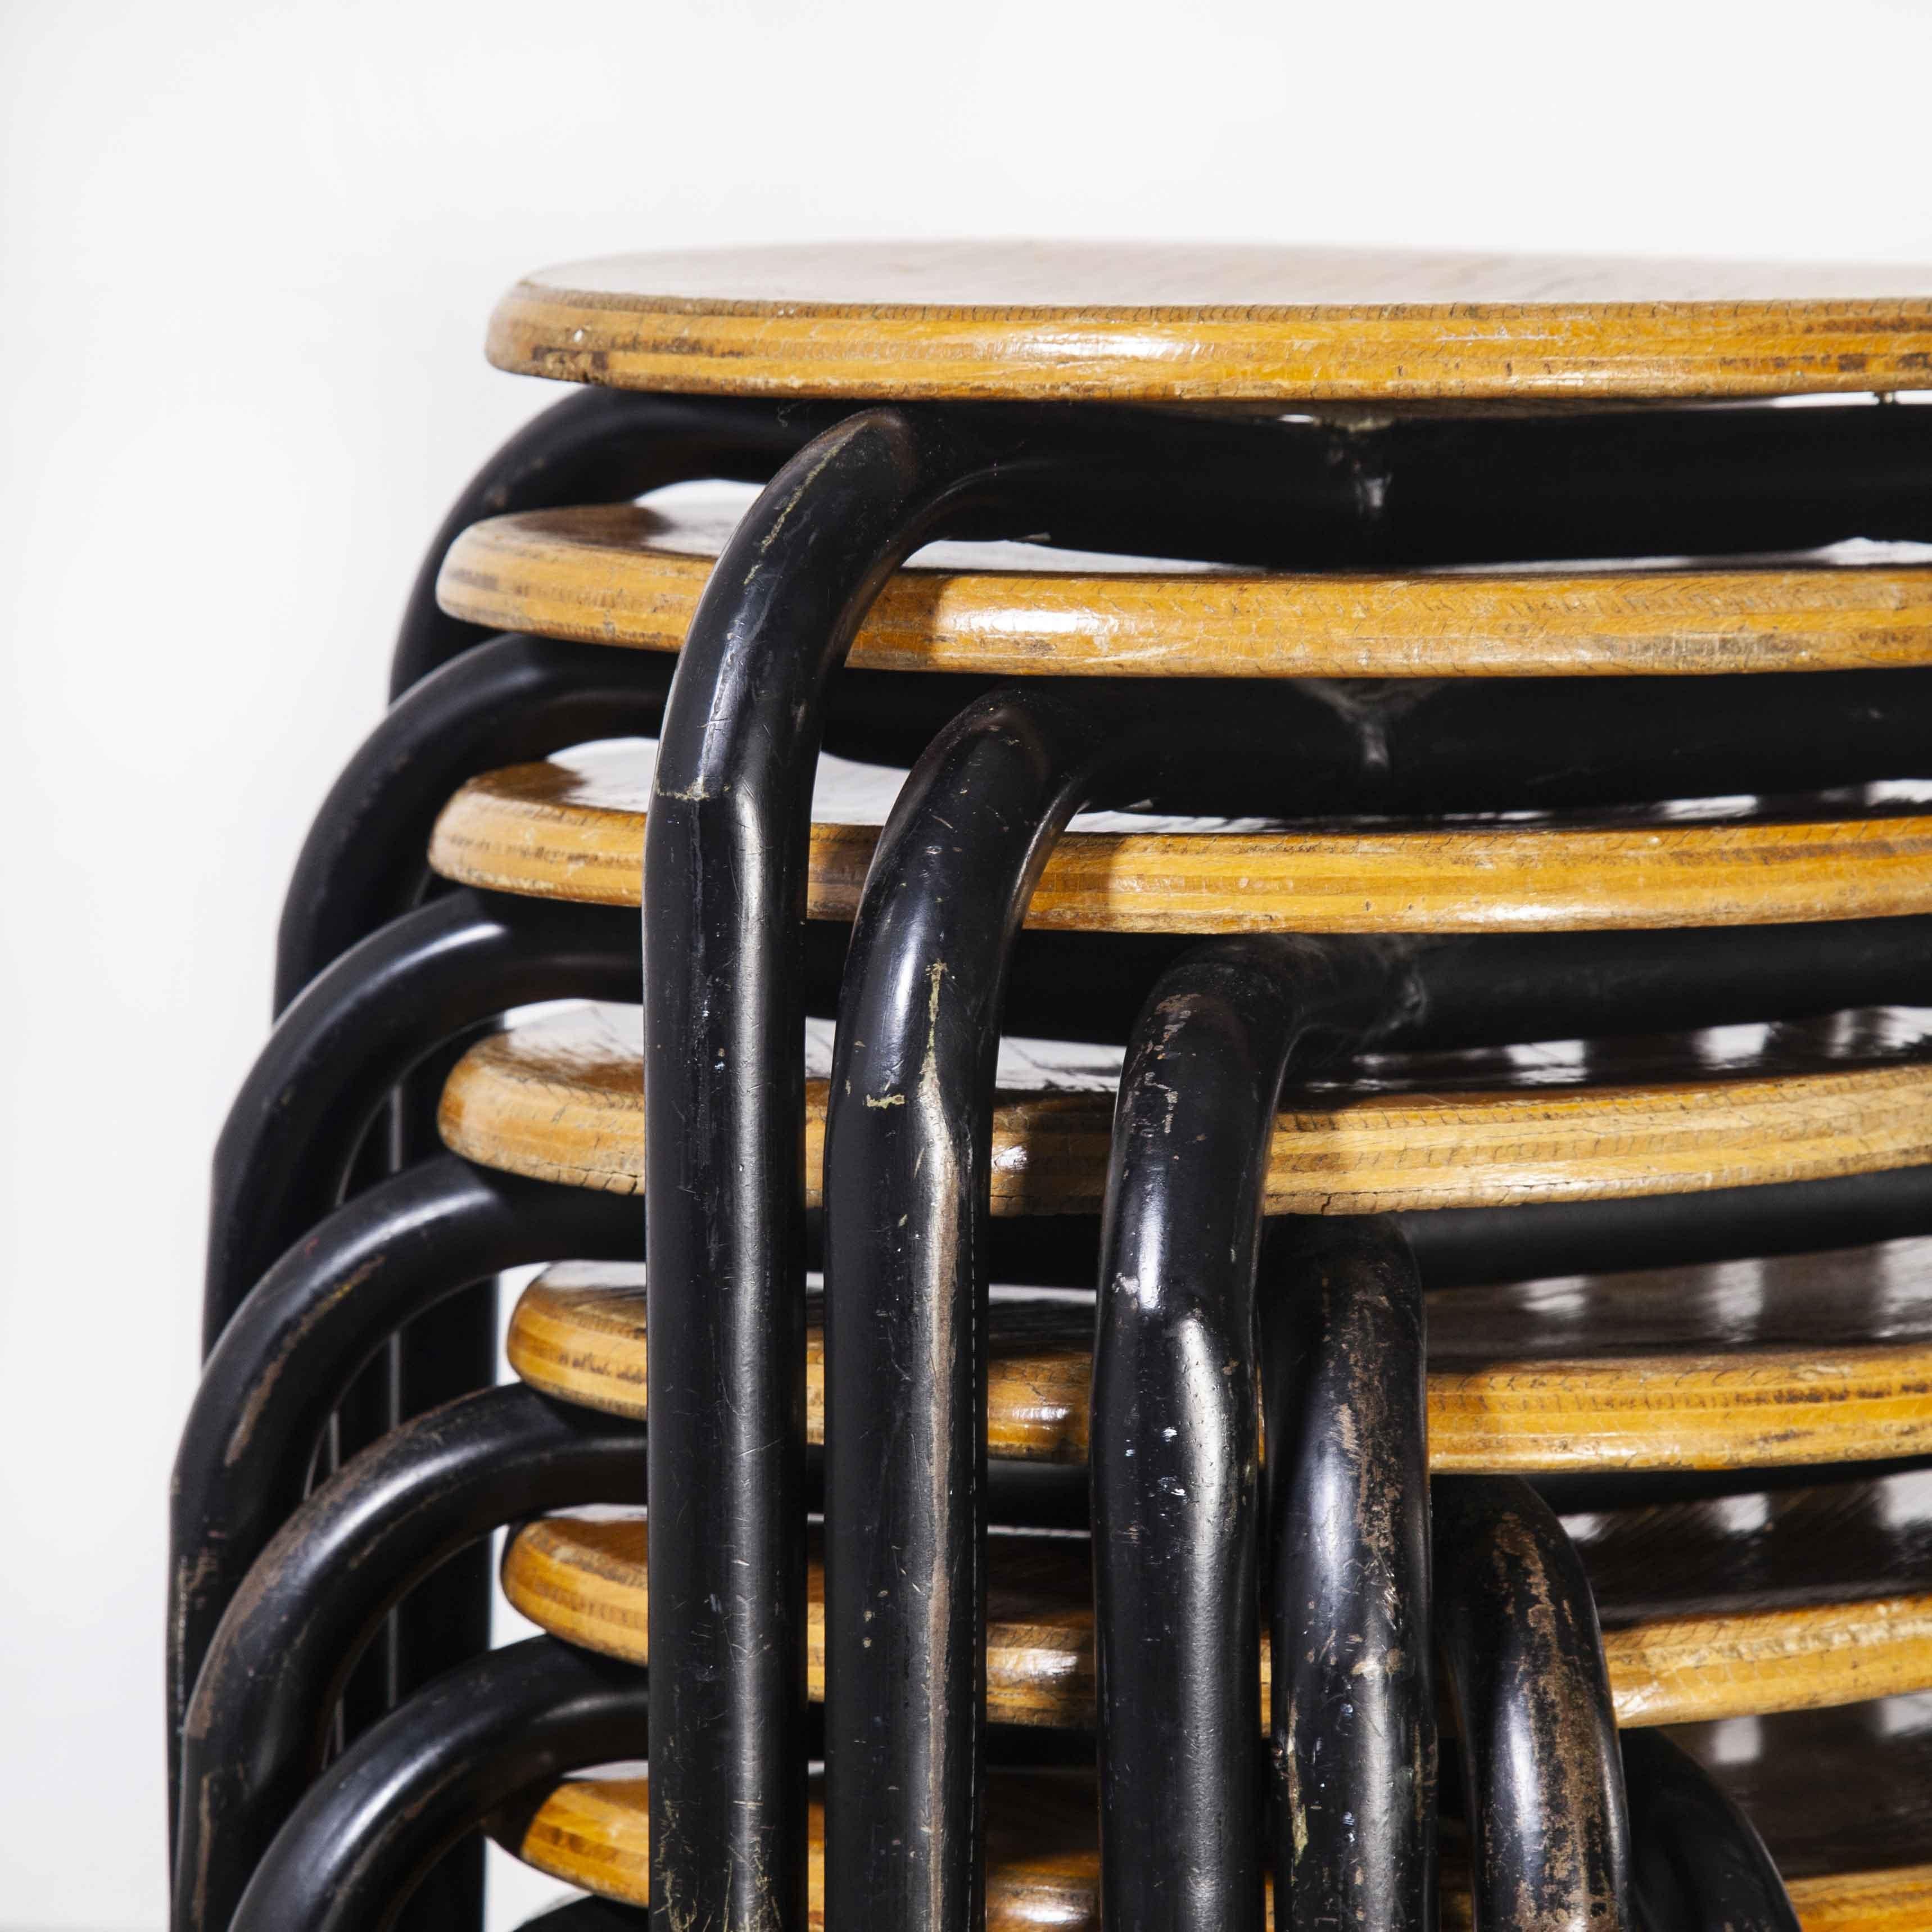 1960’s simple French Stacking School stools – black – set of eight

1960’s Simple French Stacking School stools – black – set of eight. Classic French school stools, solid beech laminated tops with strong metal bases. Original stools in great